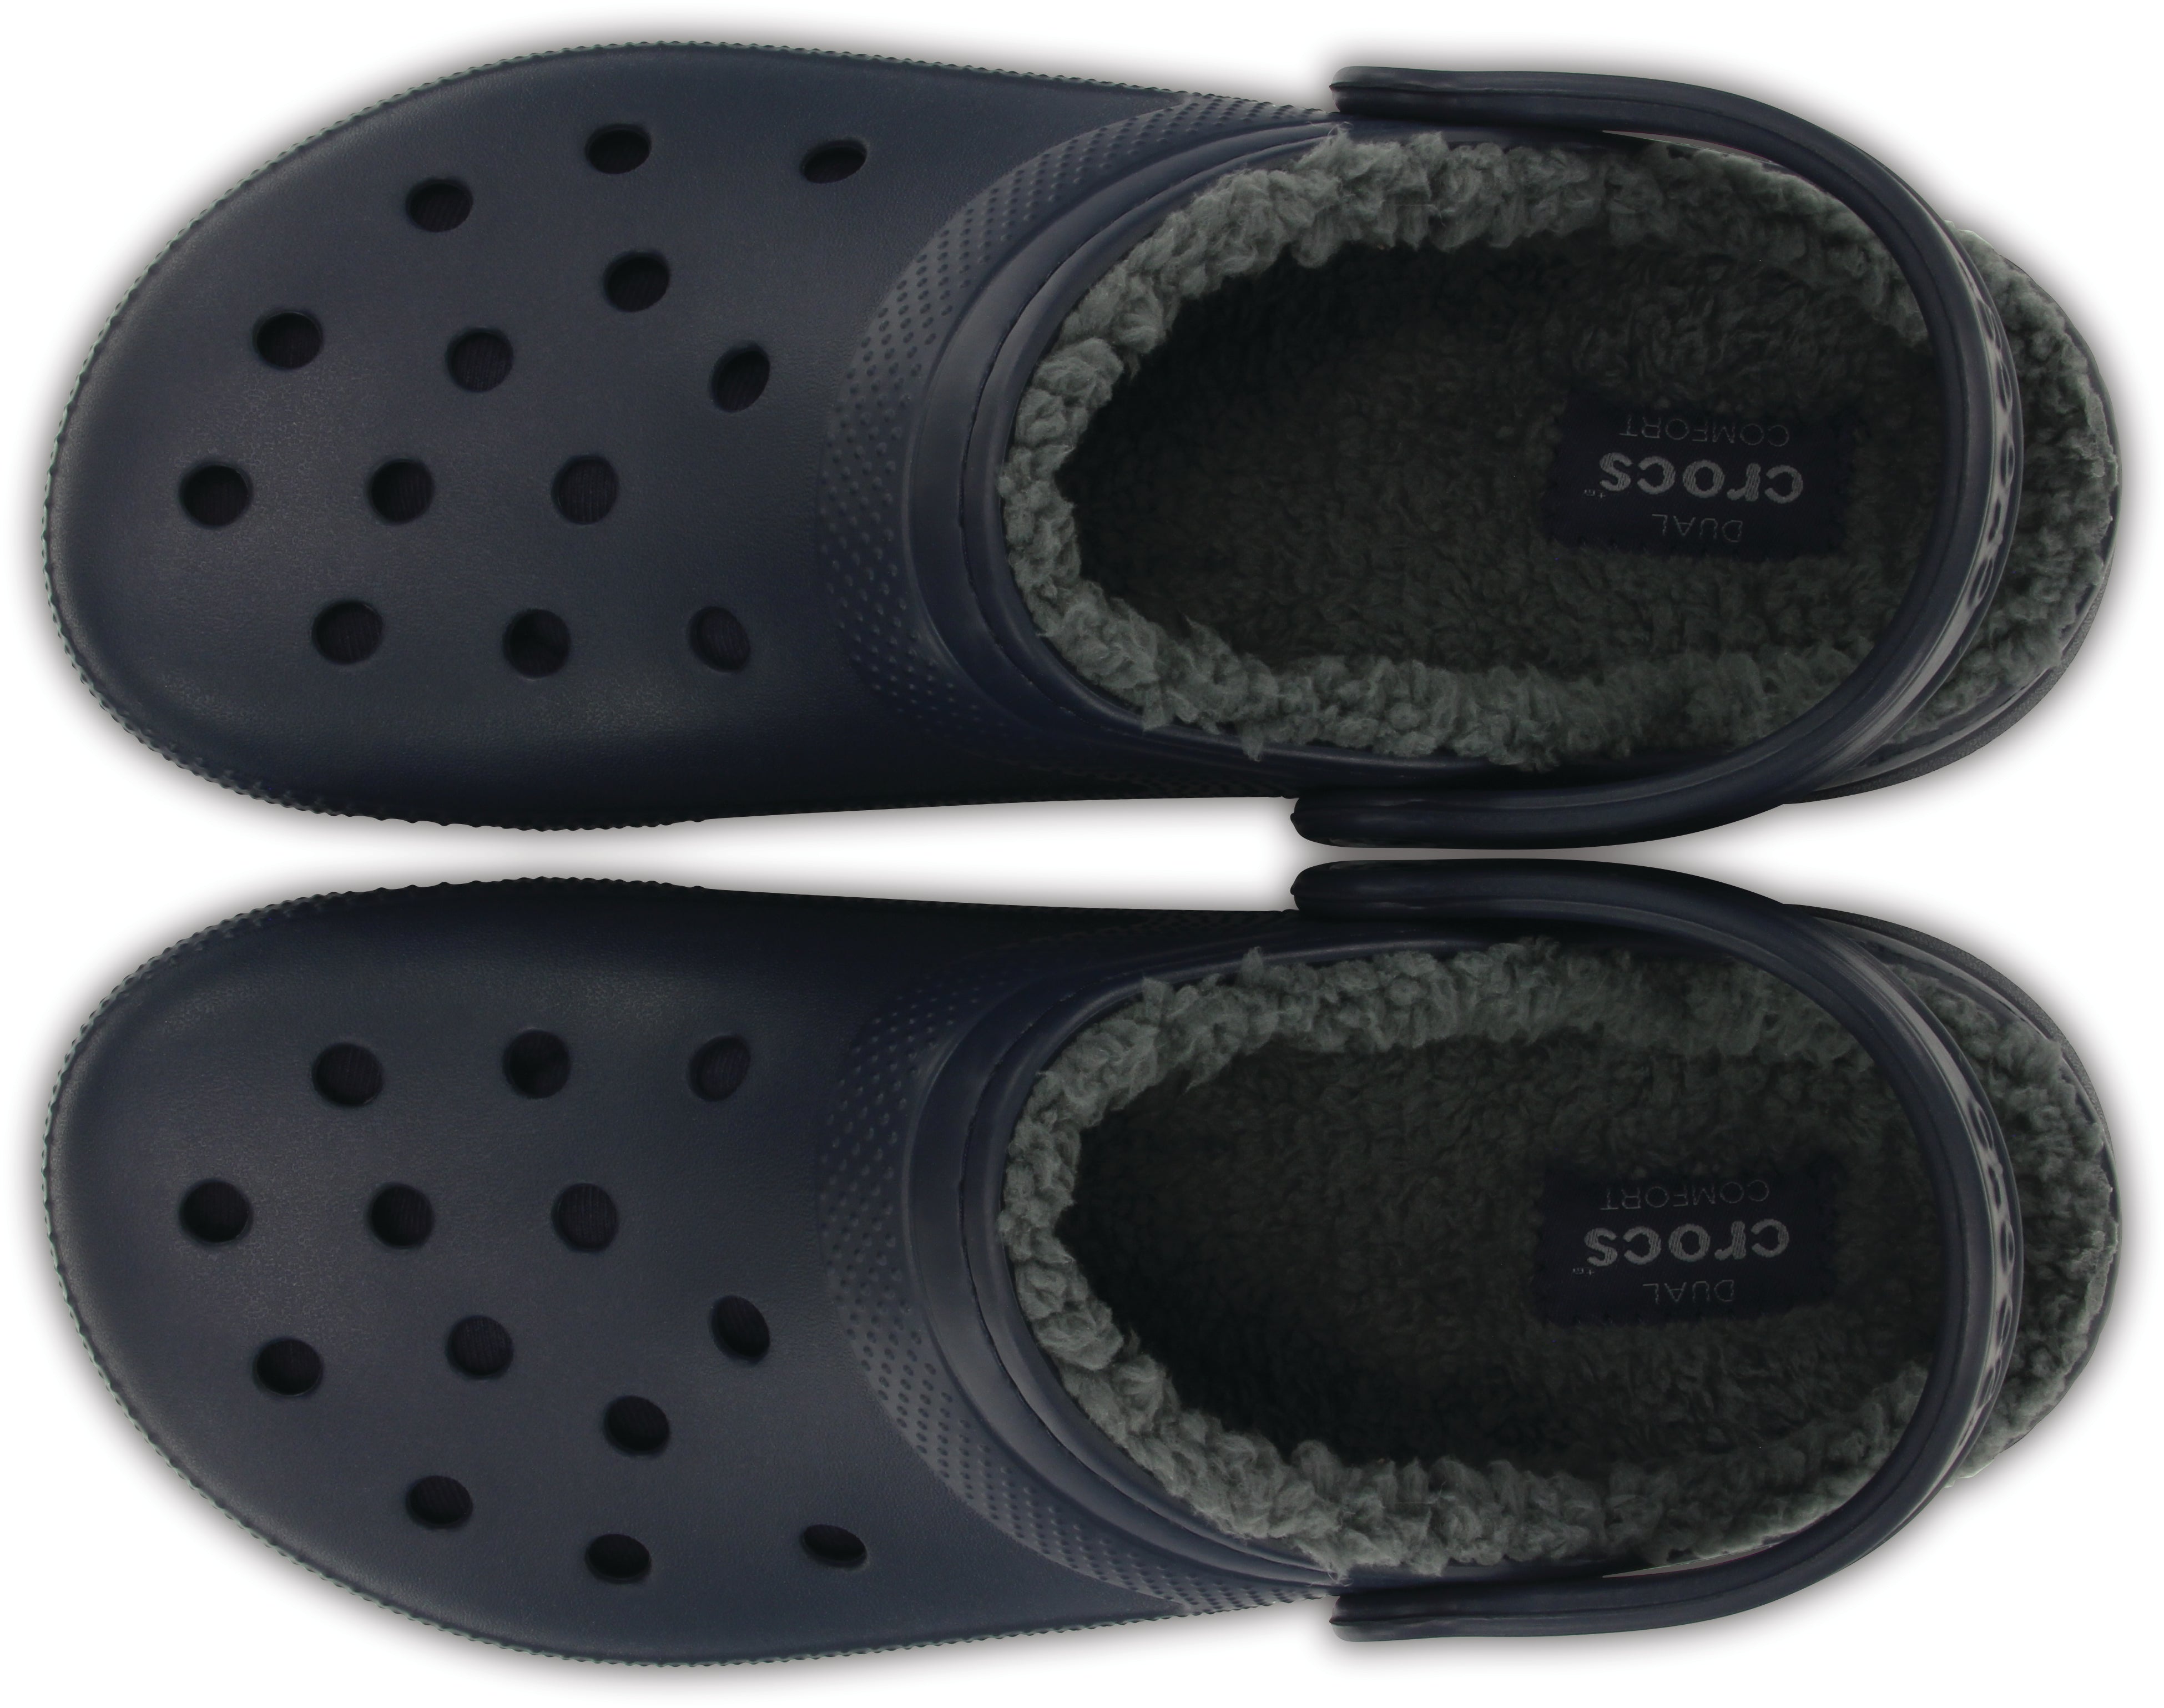 Classic Lined Clog Navy/Charcoal